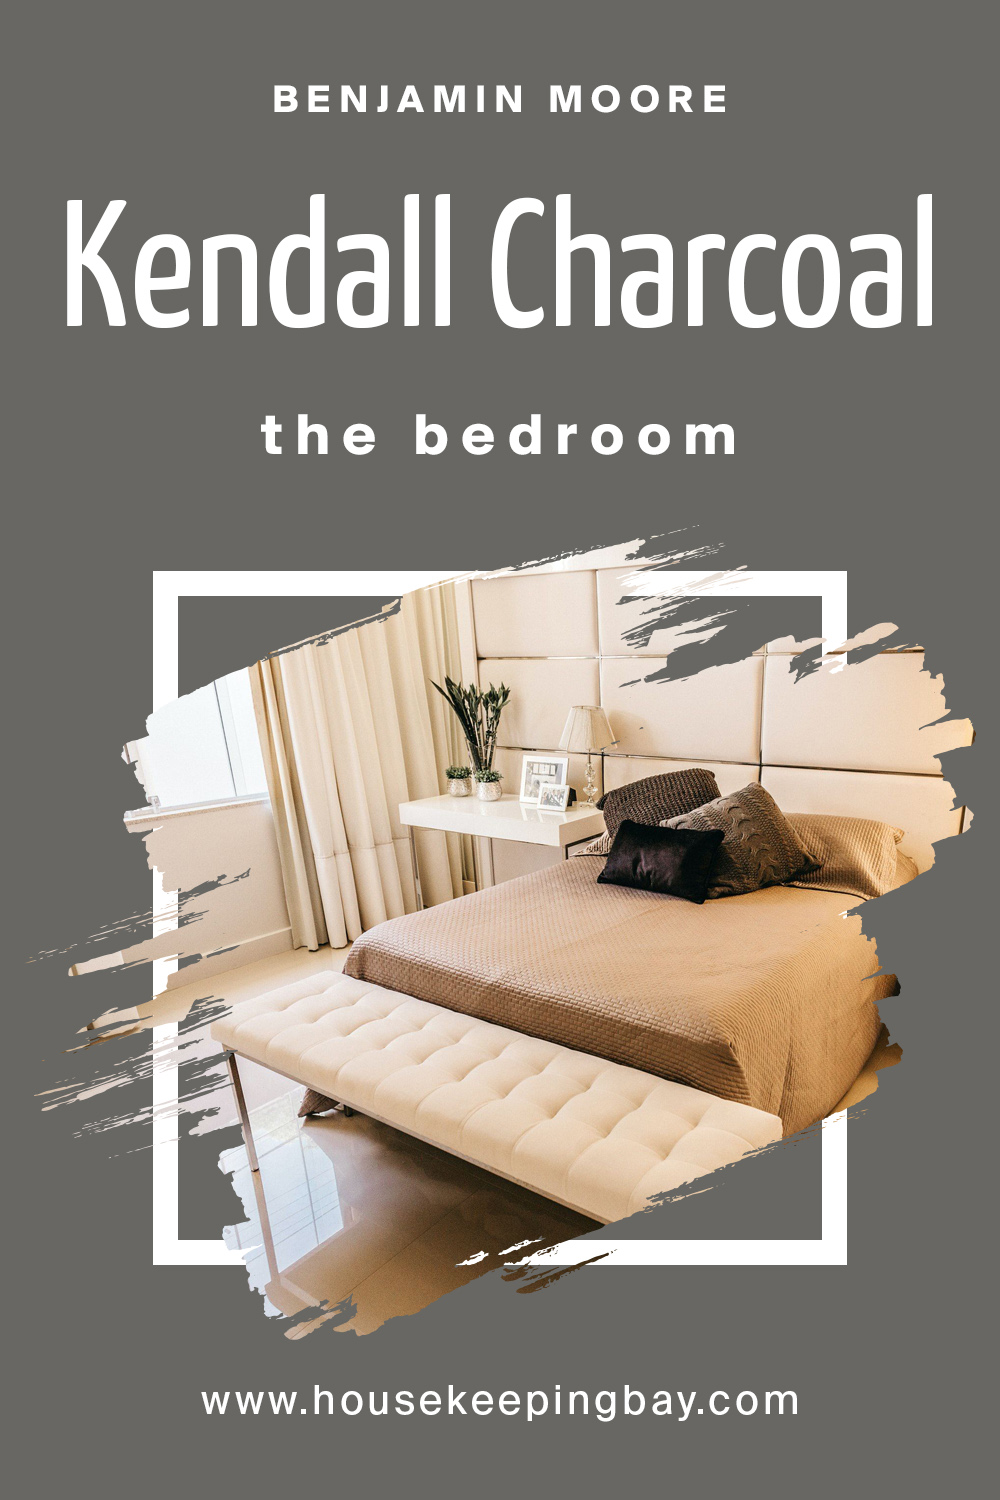 kendall charcoal in the bedroom